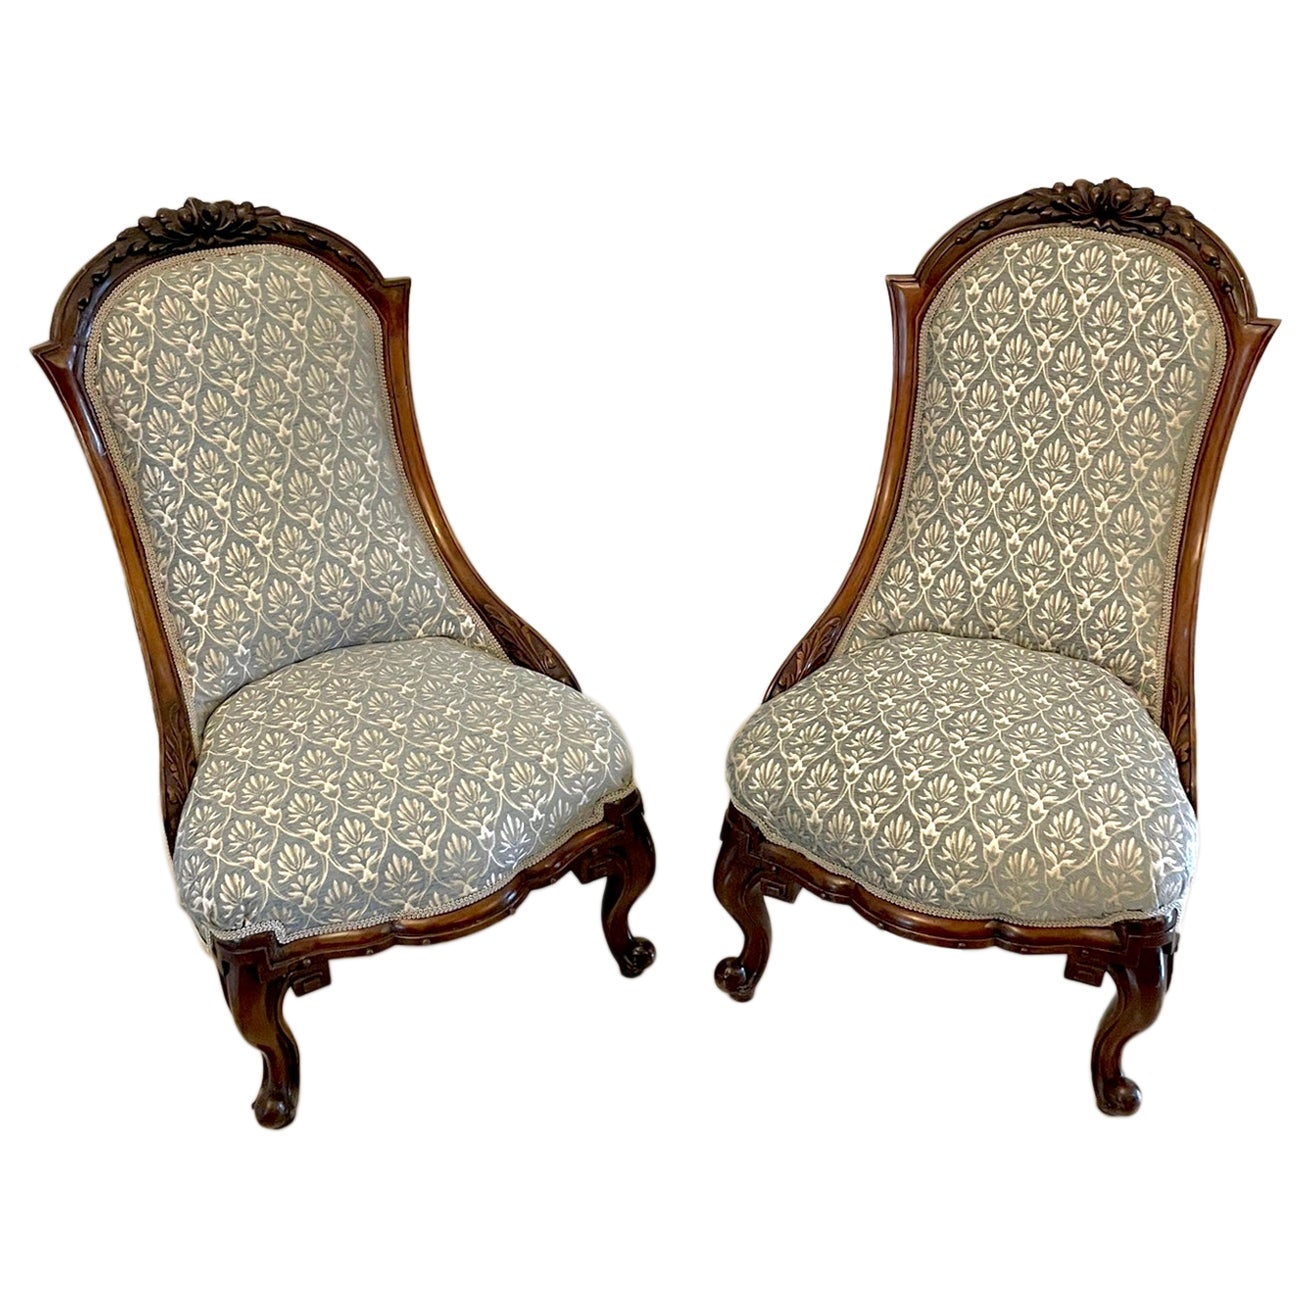 Quality Pair of 19th Century Victorian Antique Carved Walnut Ladies Chairs For Sale